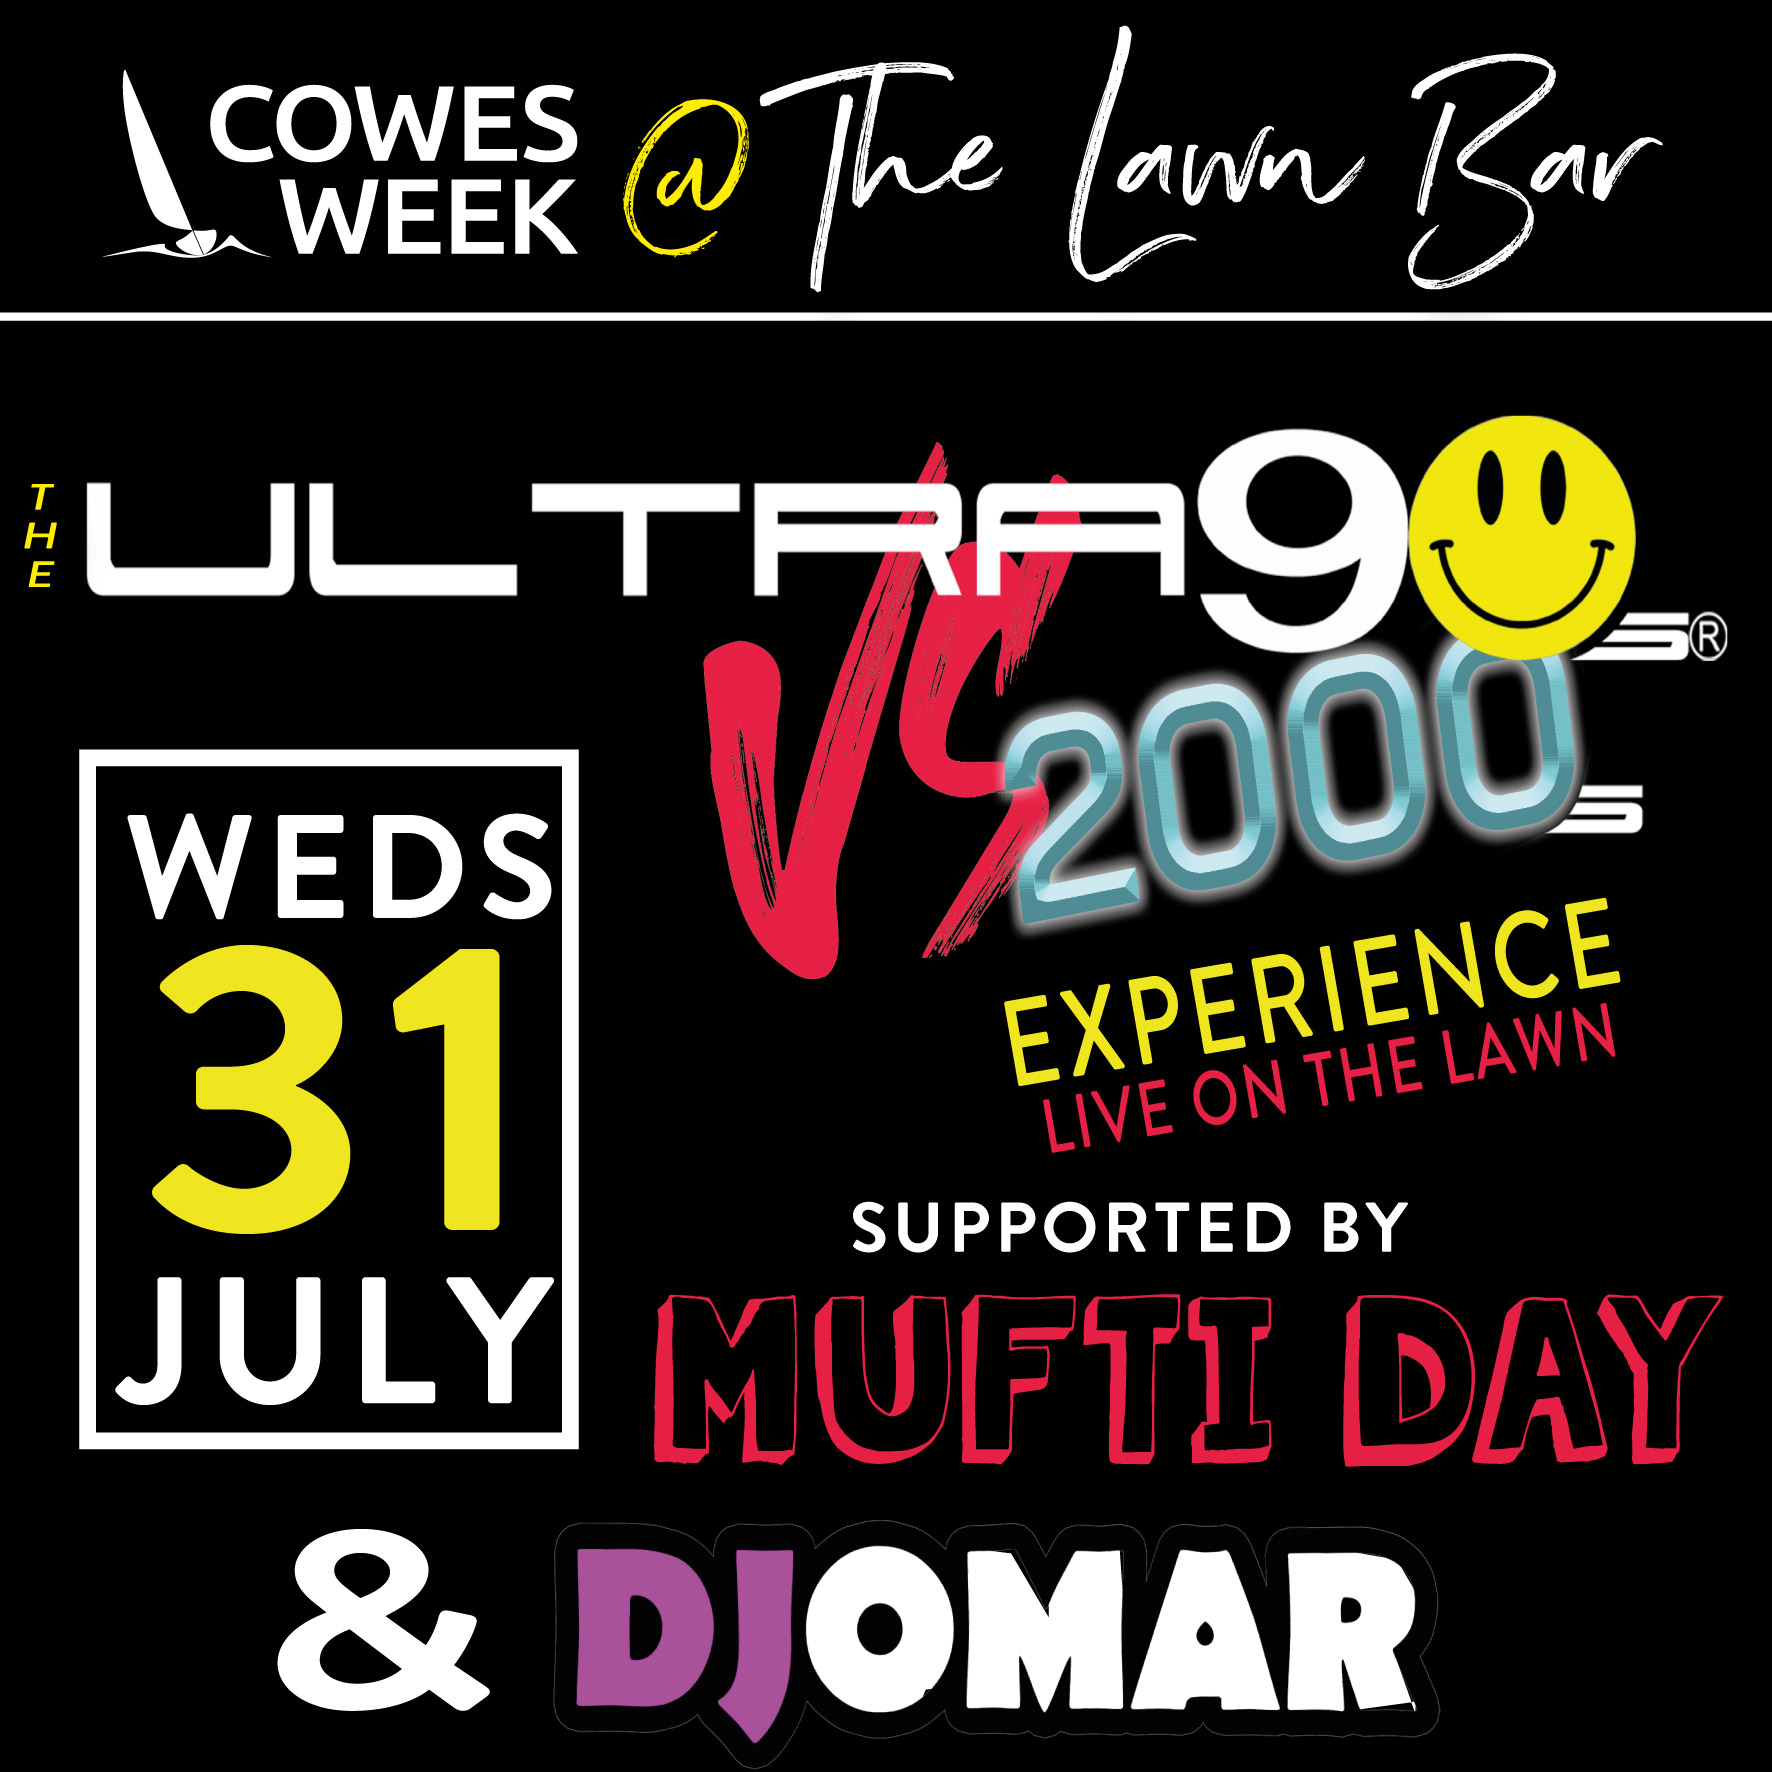 Ultra 90’s vs 2000’s Experience-Live on the Lawn